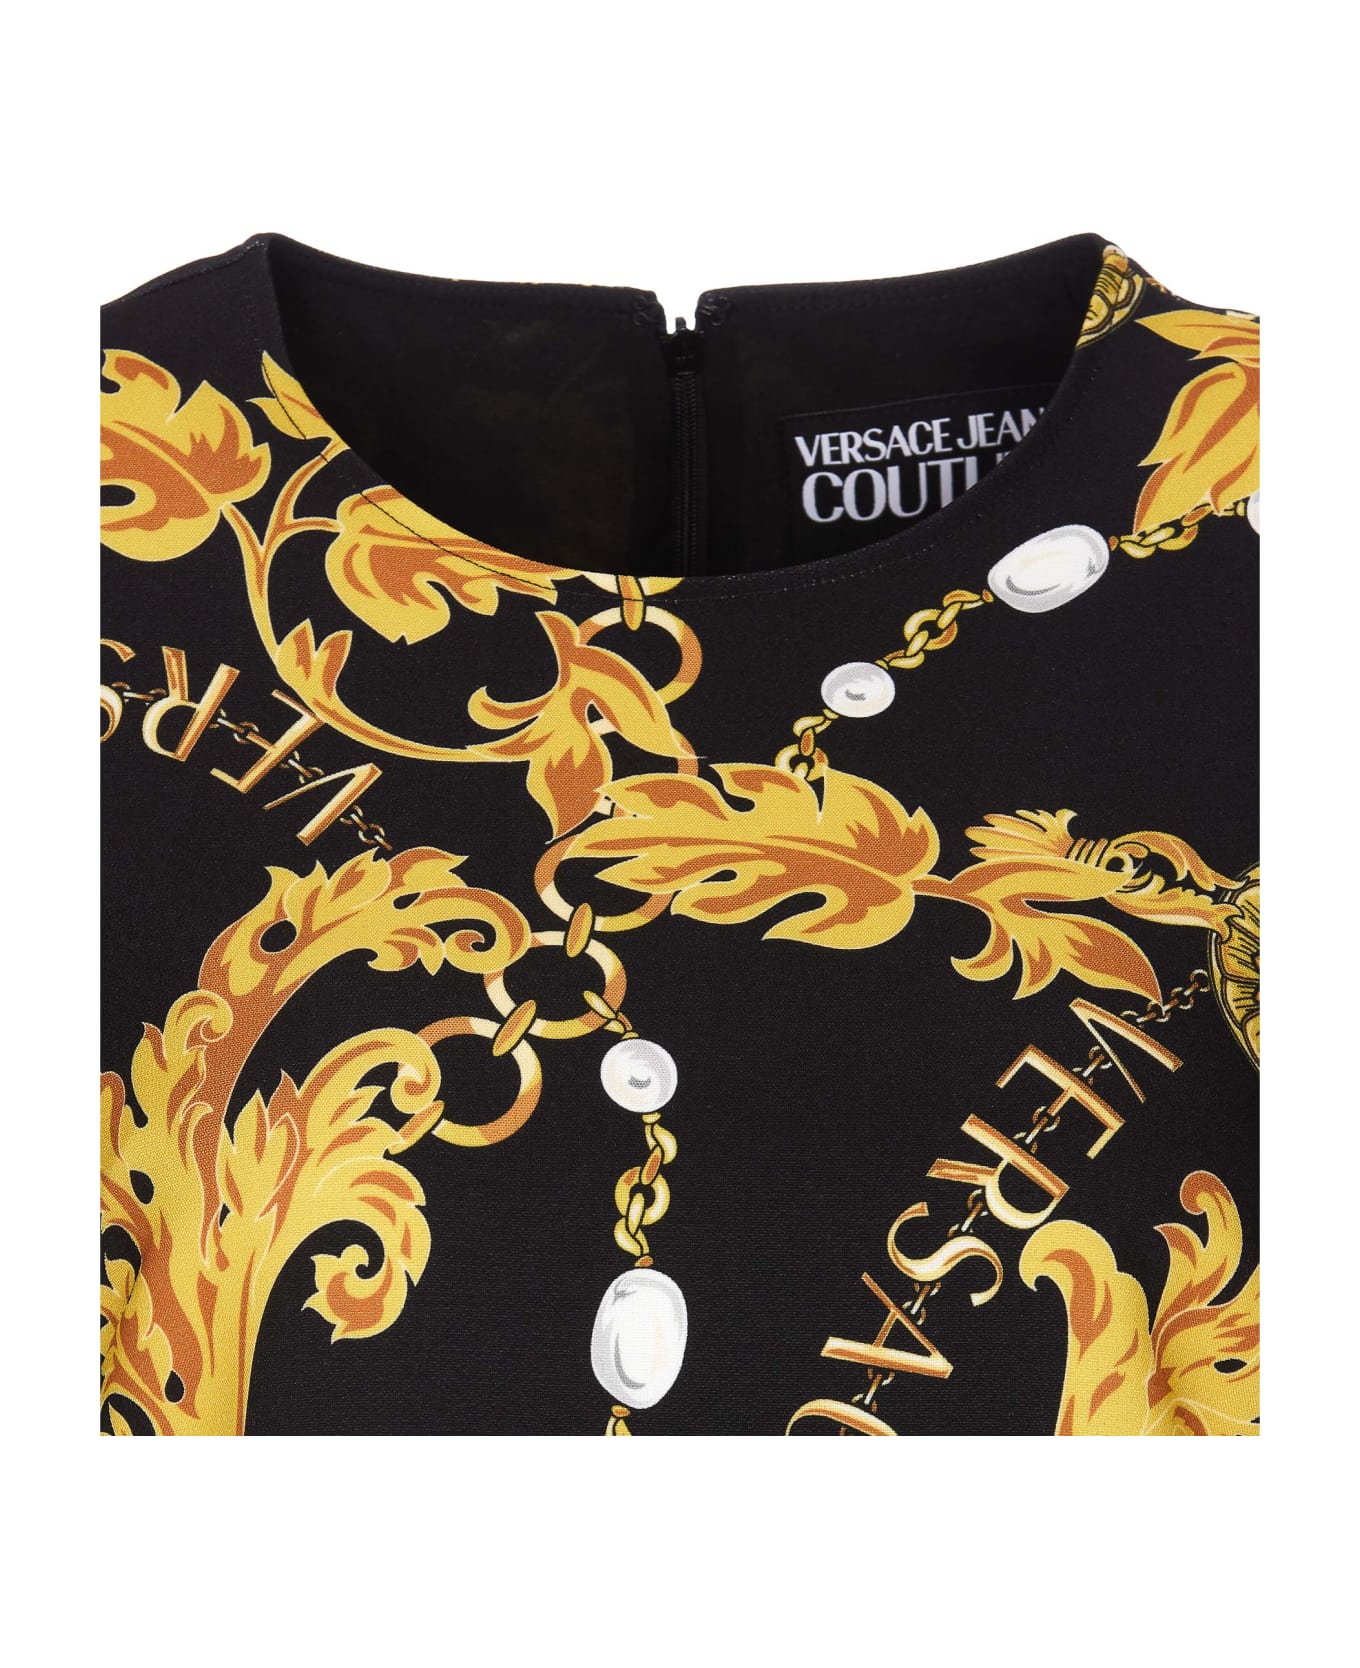 Versace Jeans Couture Chain Couture Print Dress - Black